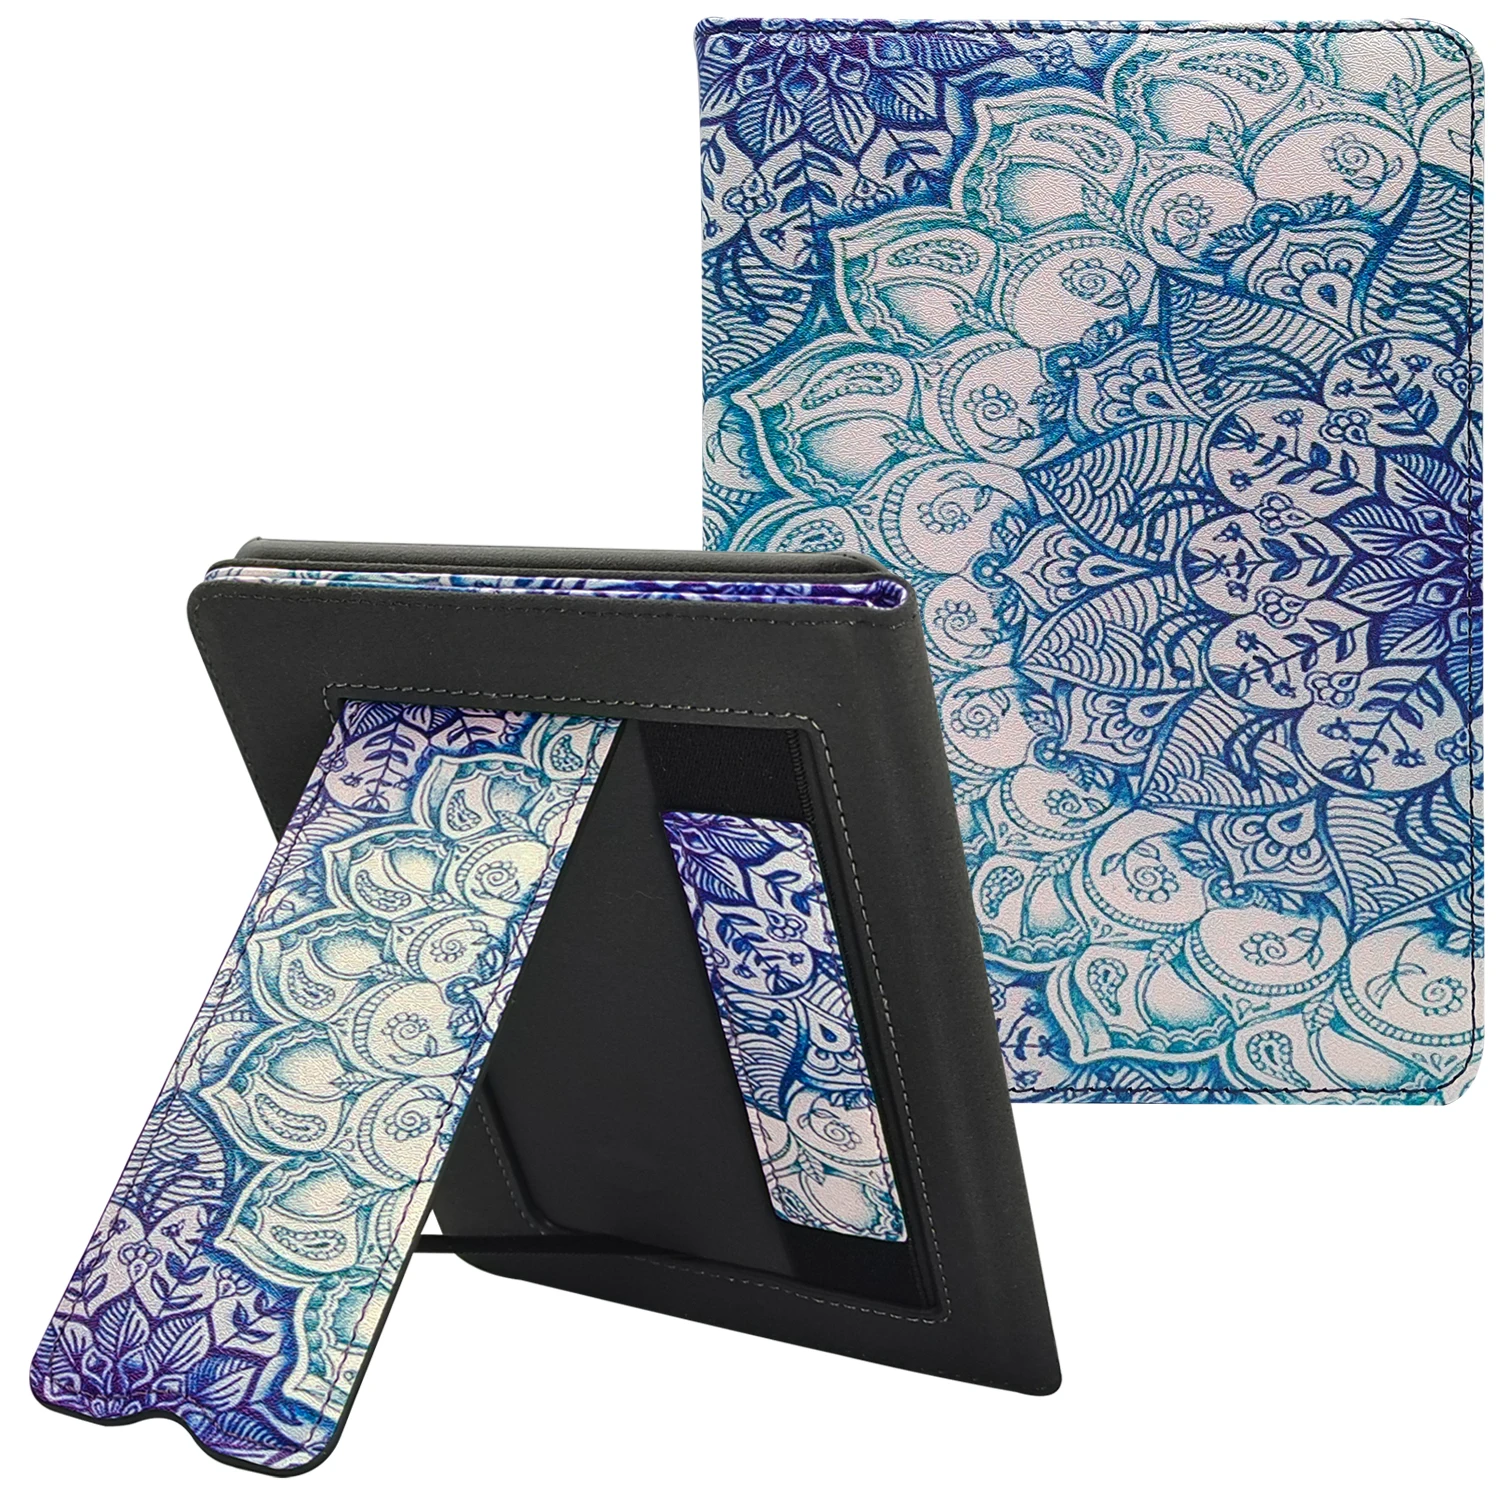 Kindle Paperwhite Case with Stand - Durable PU Leather Cover with